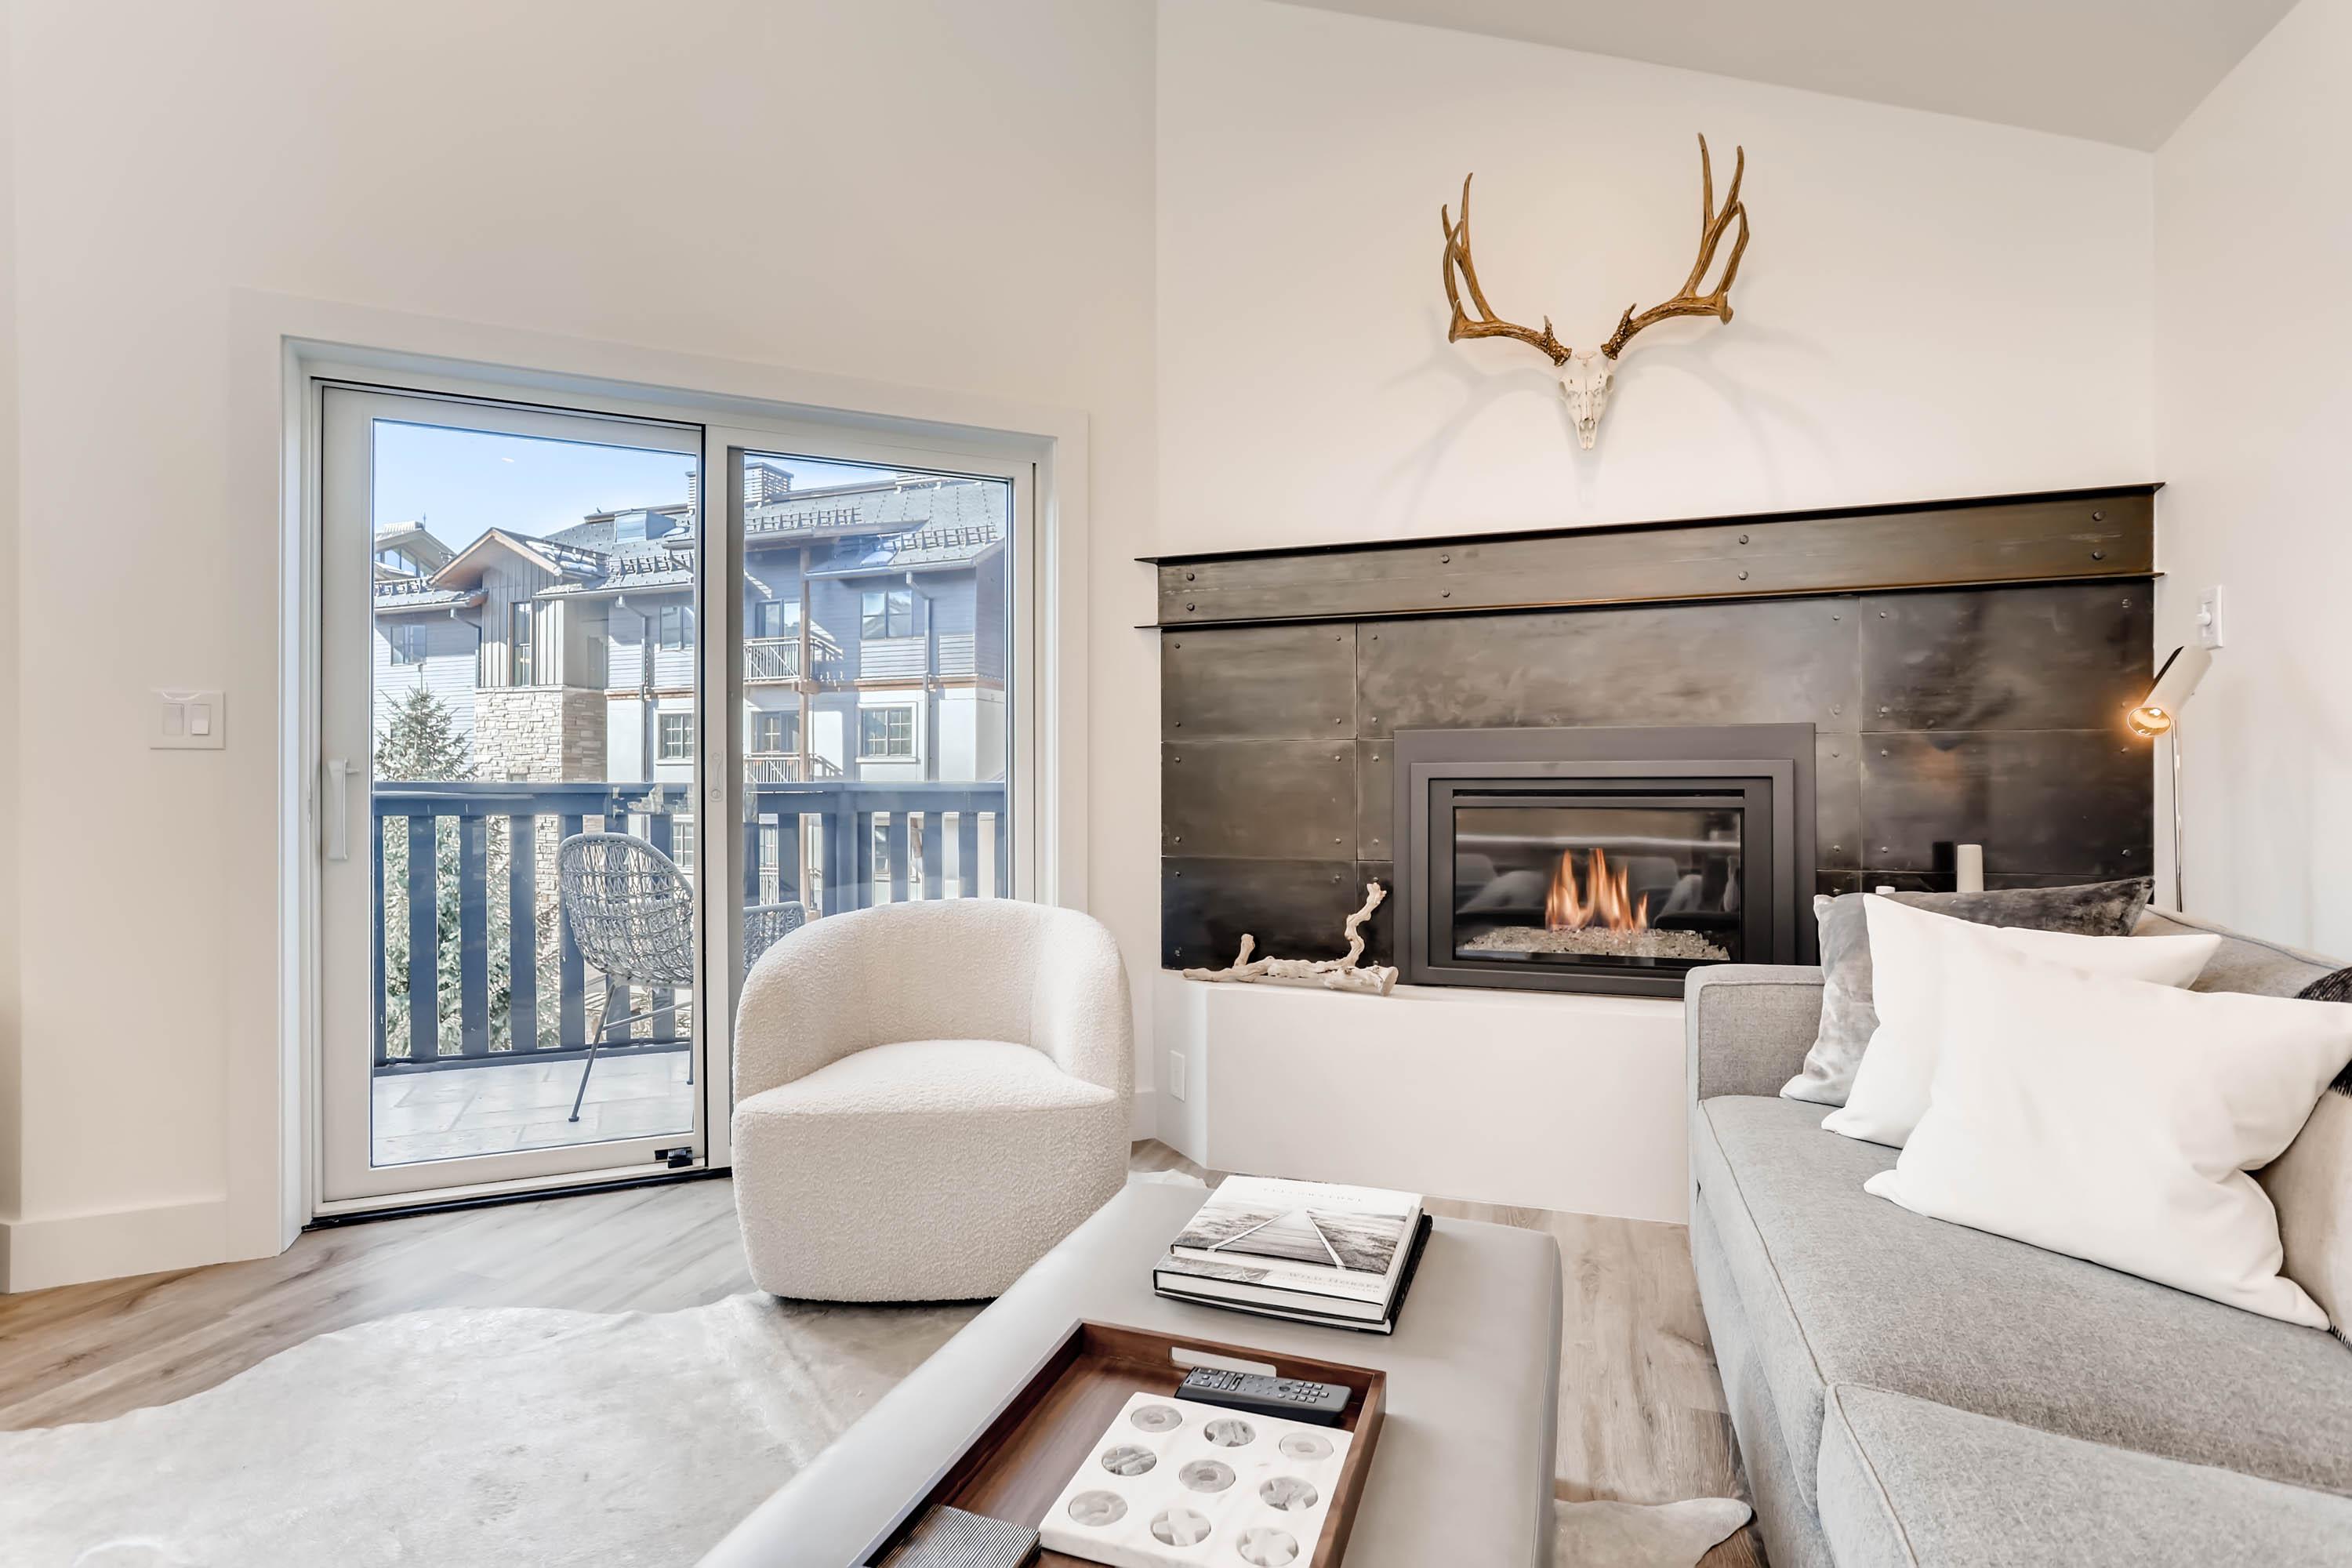 Great views and beautiful fireplace in the open living area.